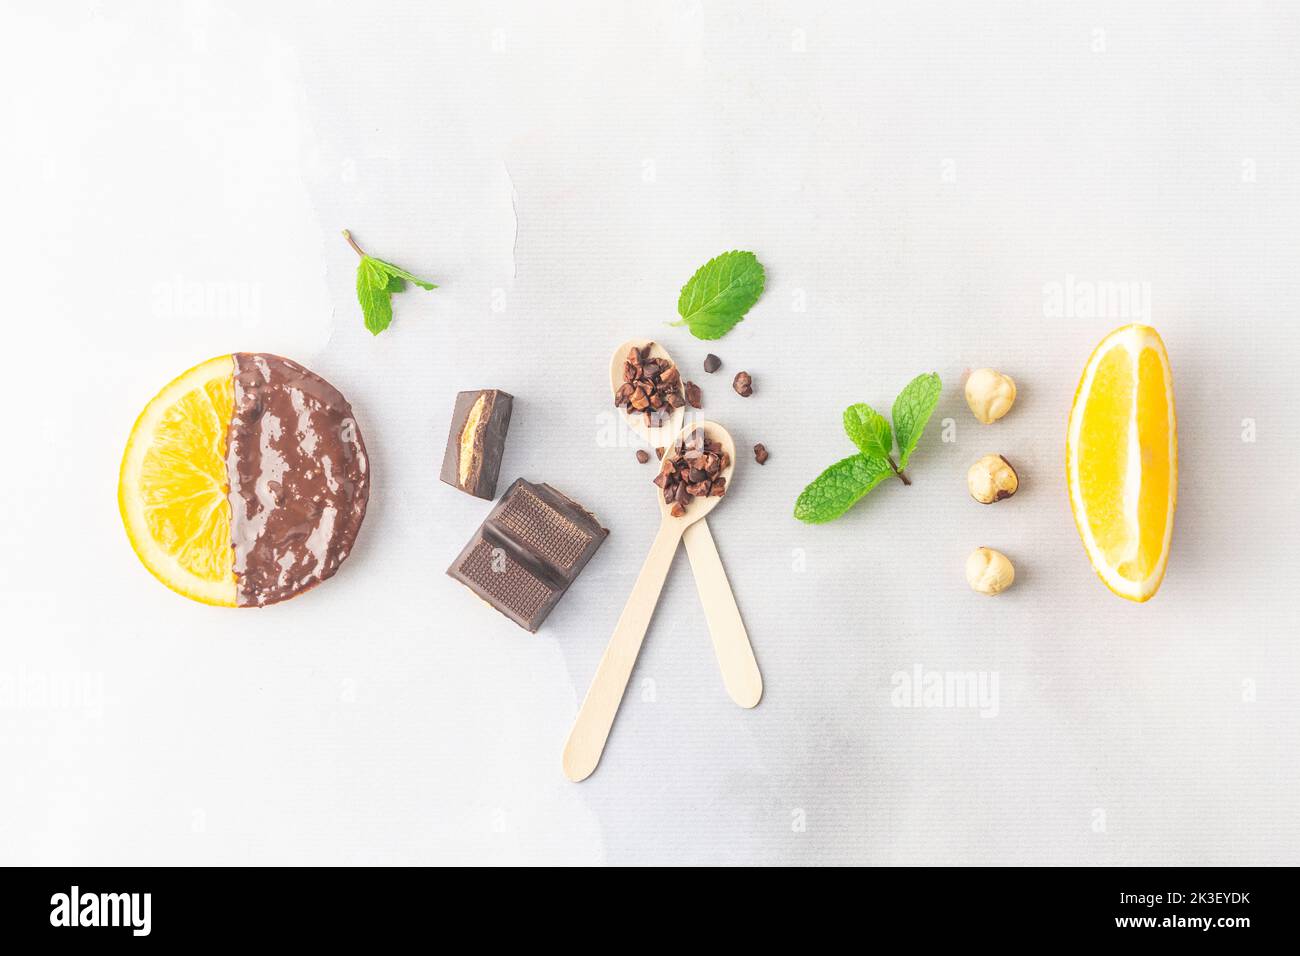 Making candied orange slices dipped in dark chocolate flatlay Stock Photo